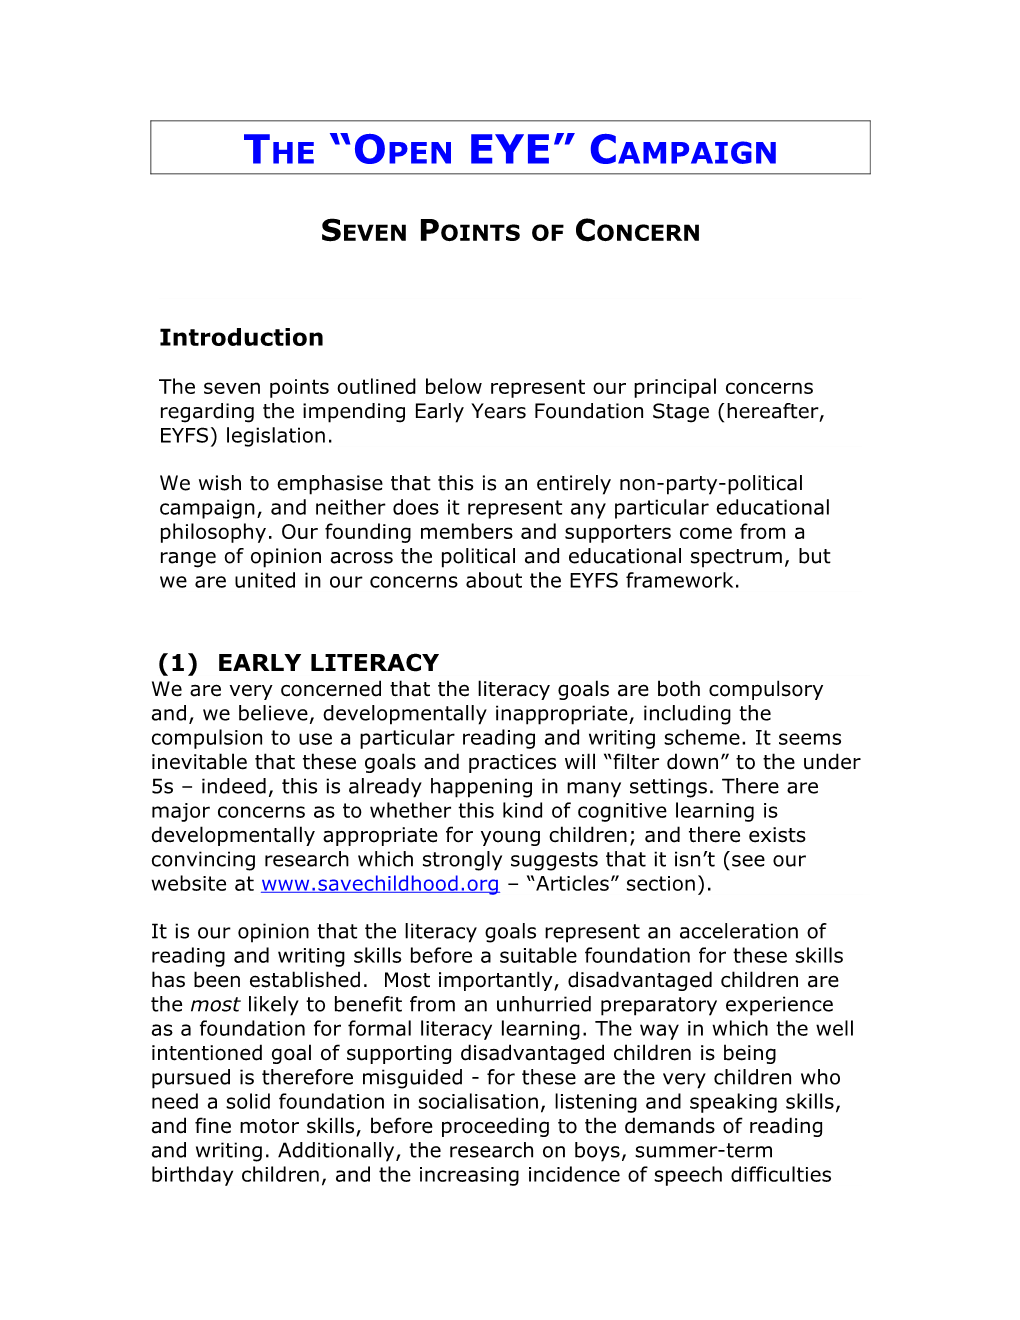 The Open Eye Campaign